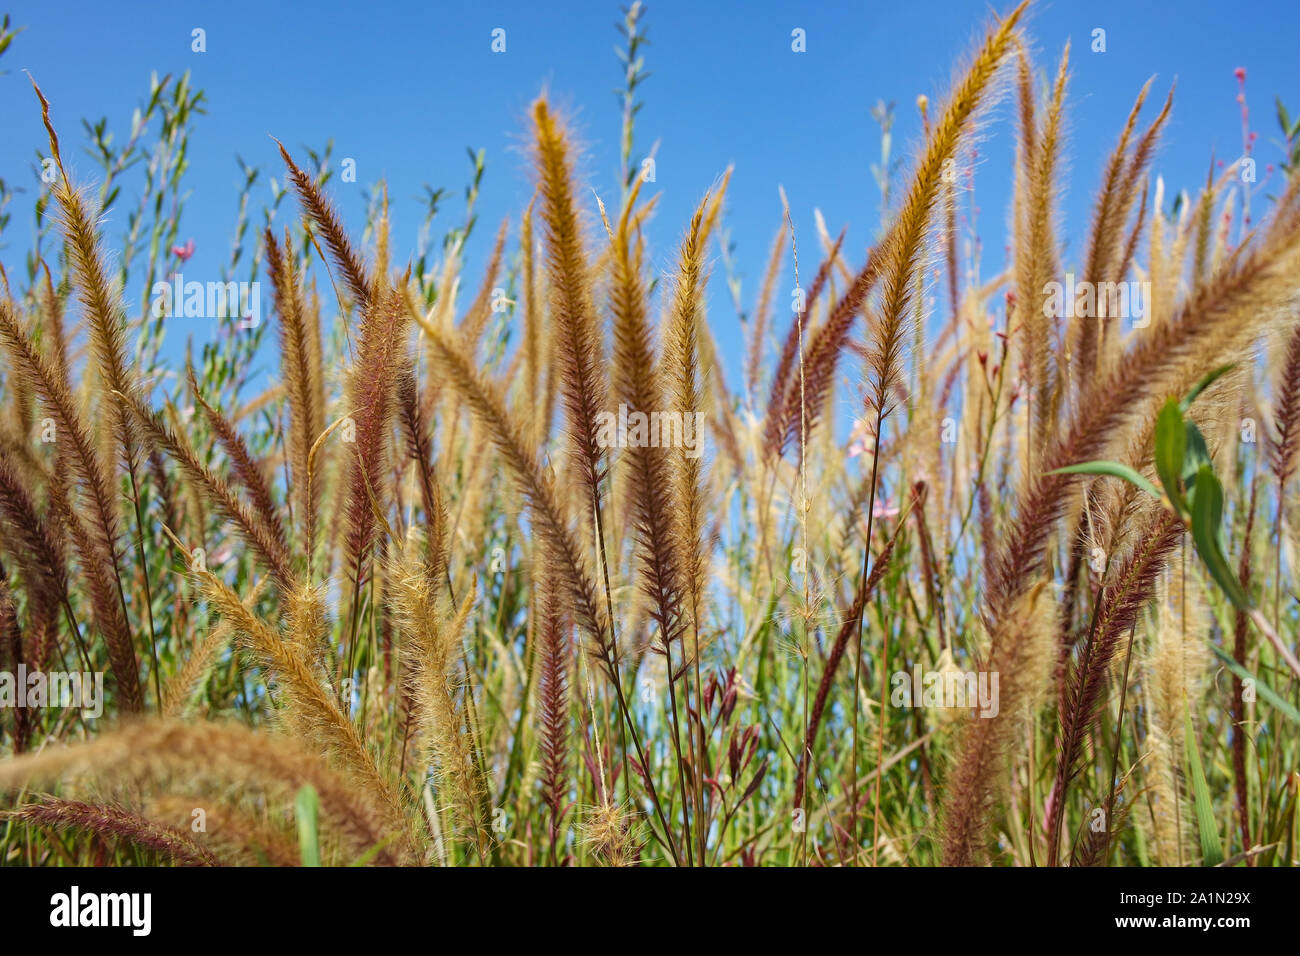 beauty in nature  grasses & flowers Stock Photo